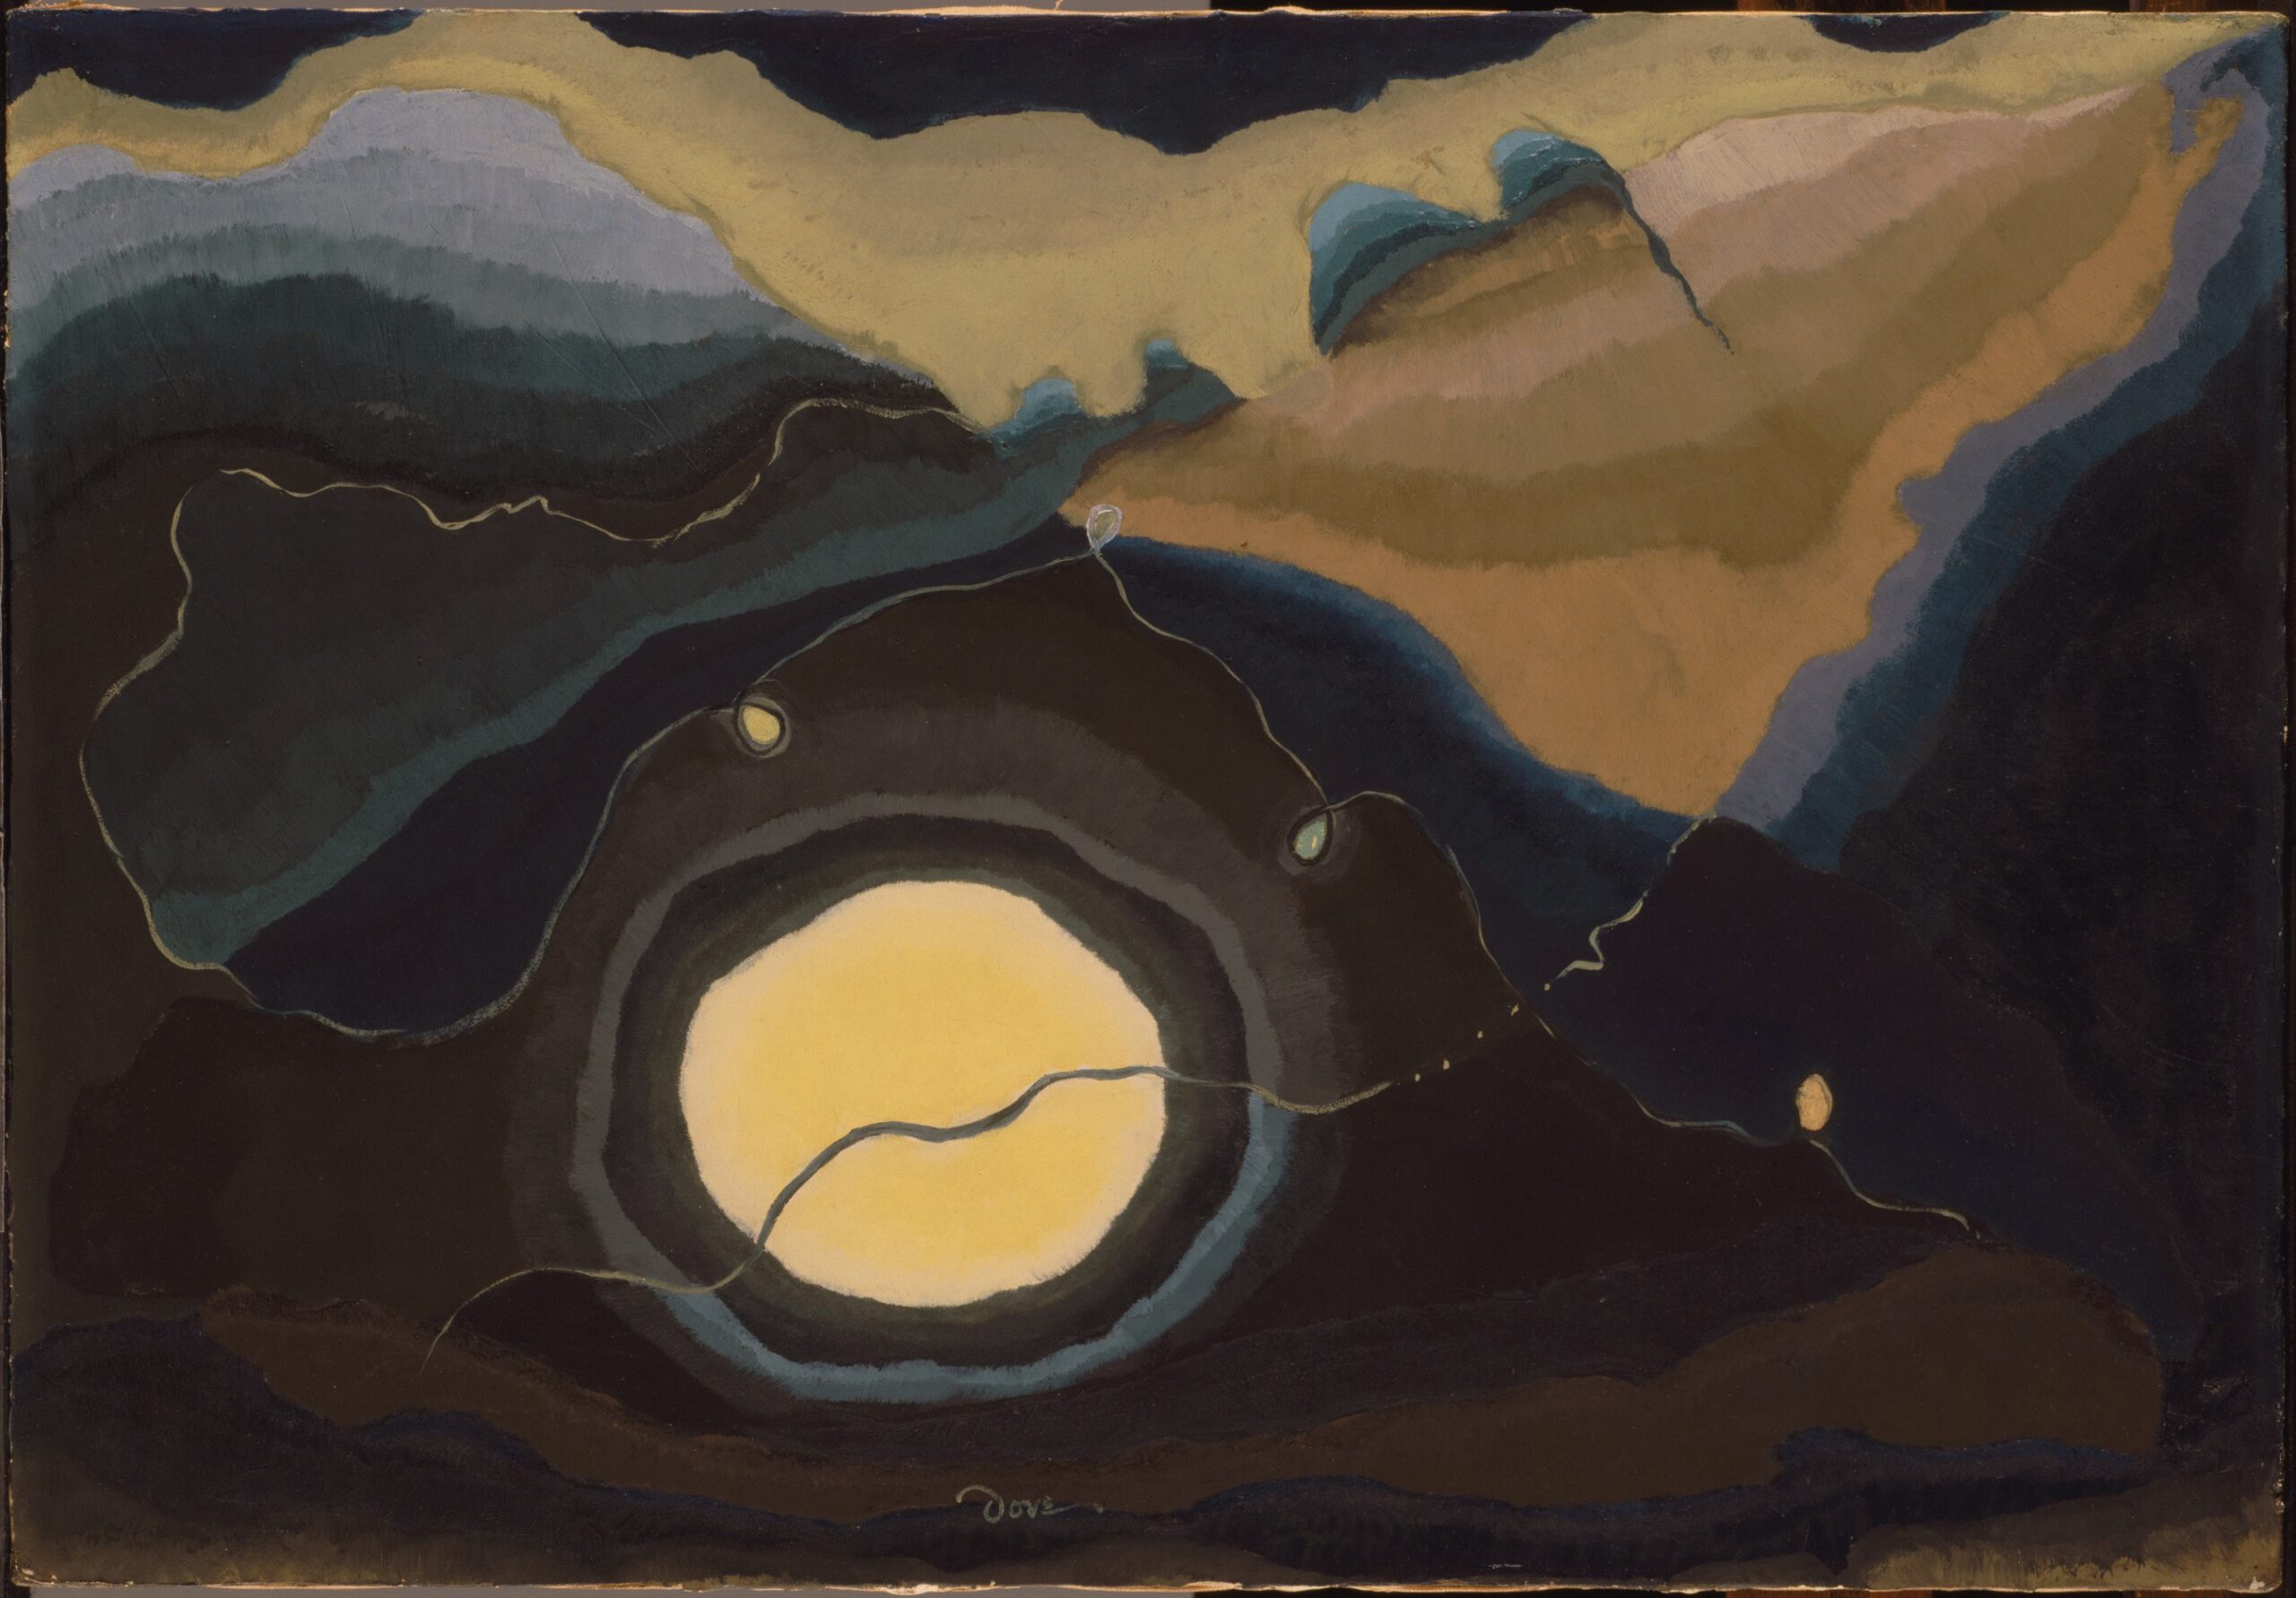 Arthur G. Dove, "Me and the Moon," 1937. Wax emulsion on canvas; 18 x 26 in. The Phillips Collection: Acquired 1939. 